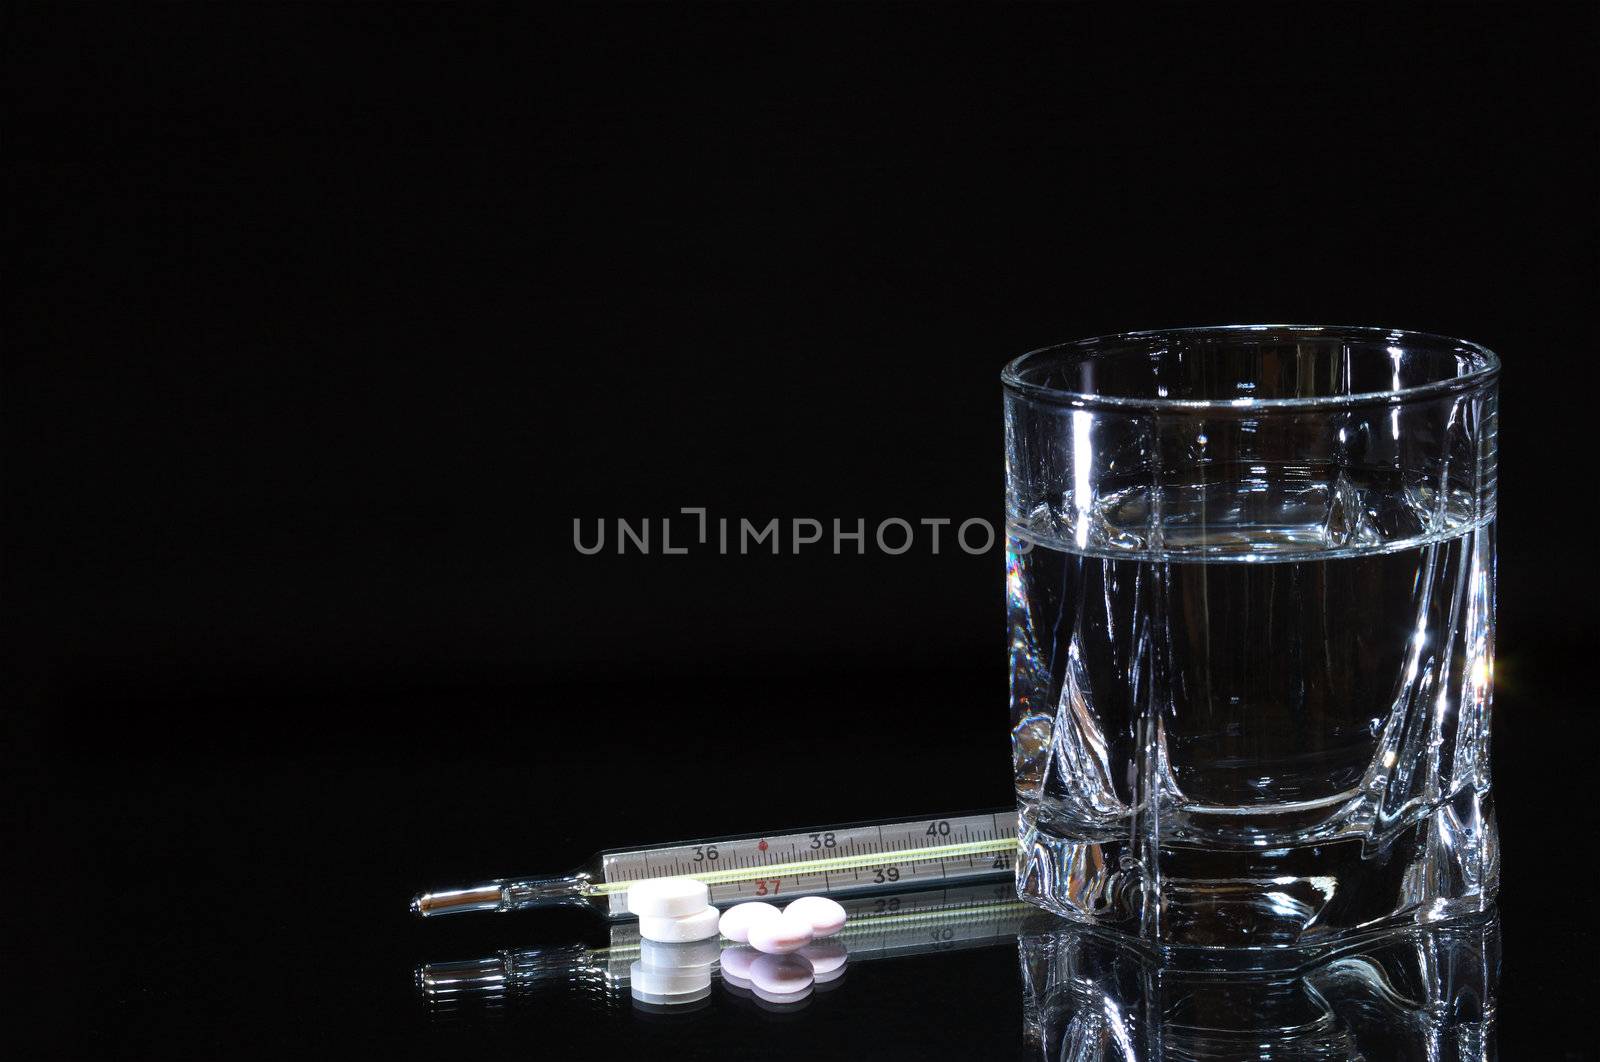 Few pills and thermometer lying near glass of water isolated on dark background with copy space